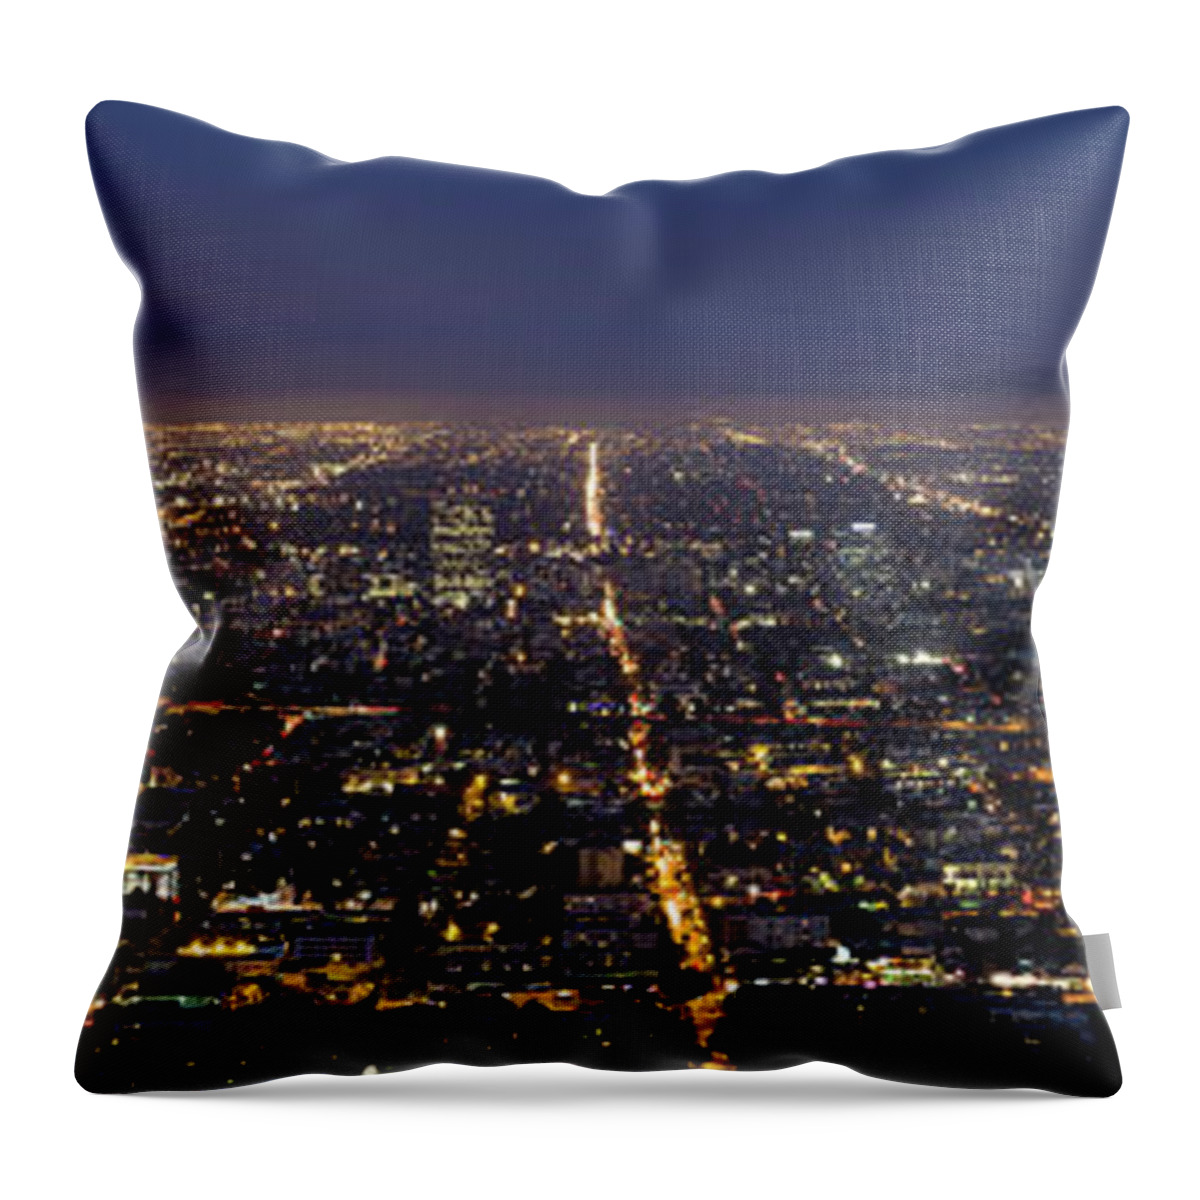 Scenics Throw Pillow featuring the photograph Panoramic View Of Los Angeles At by Chrisp0